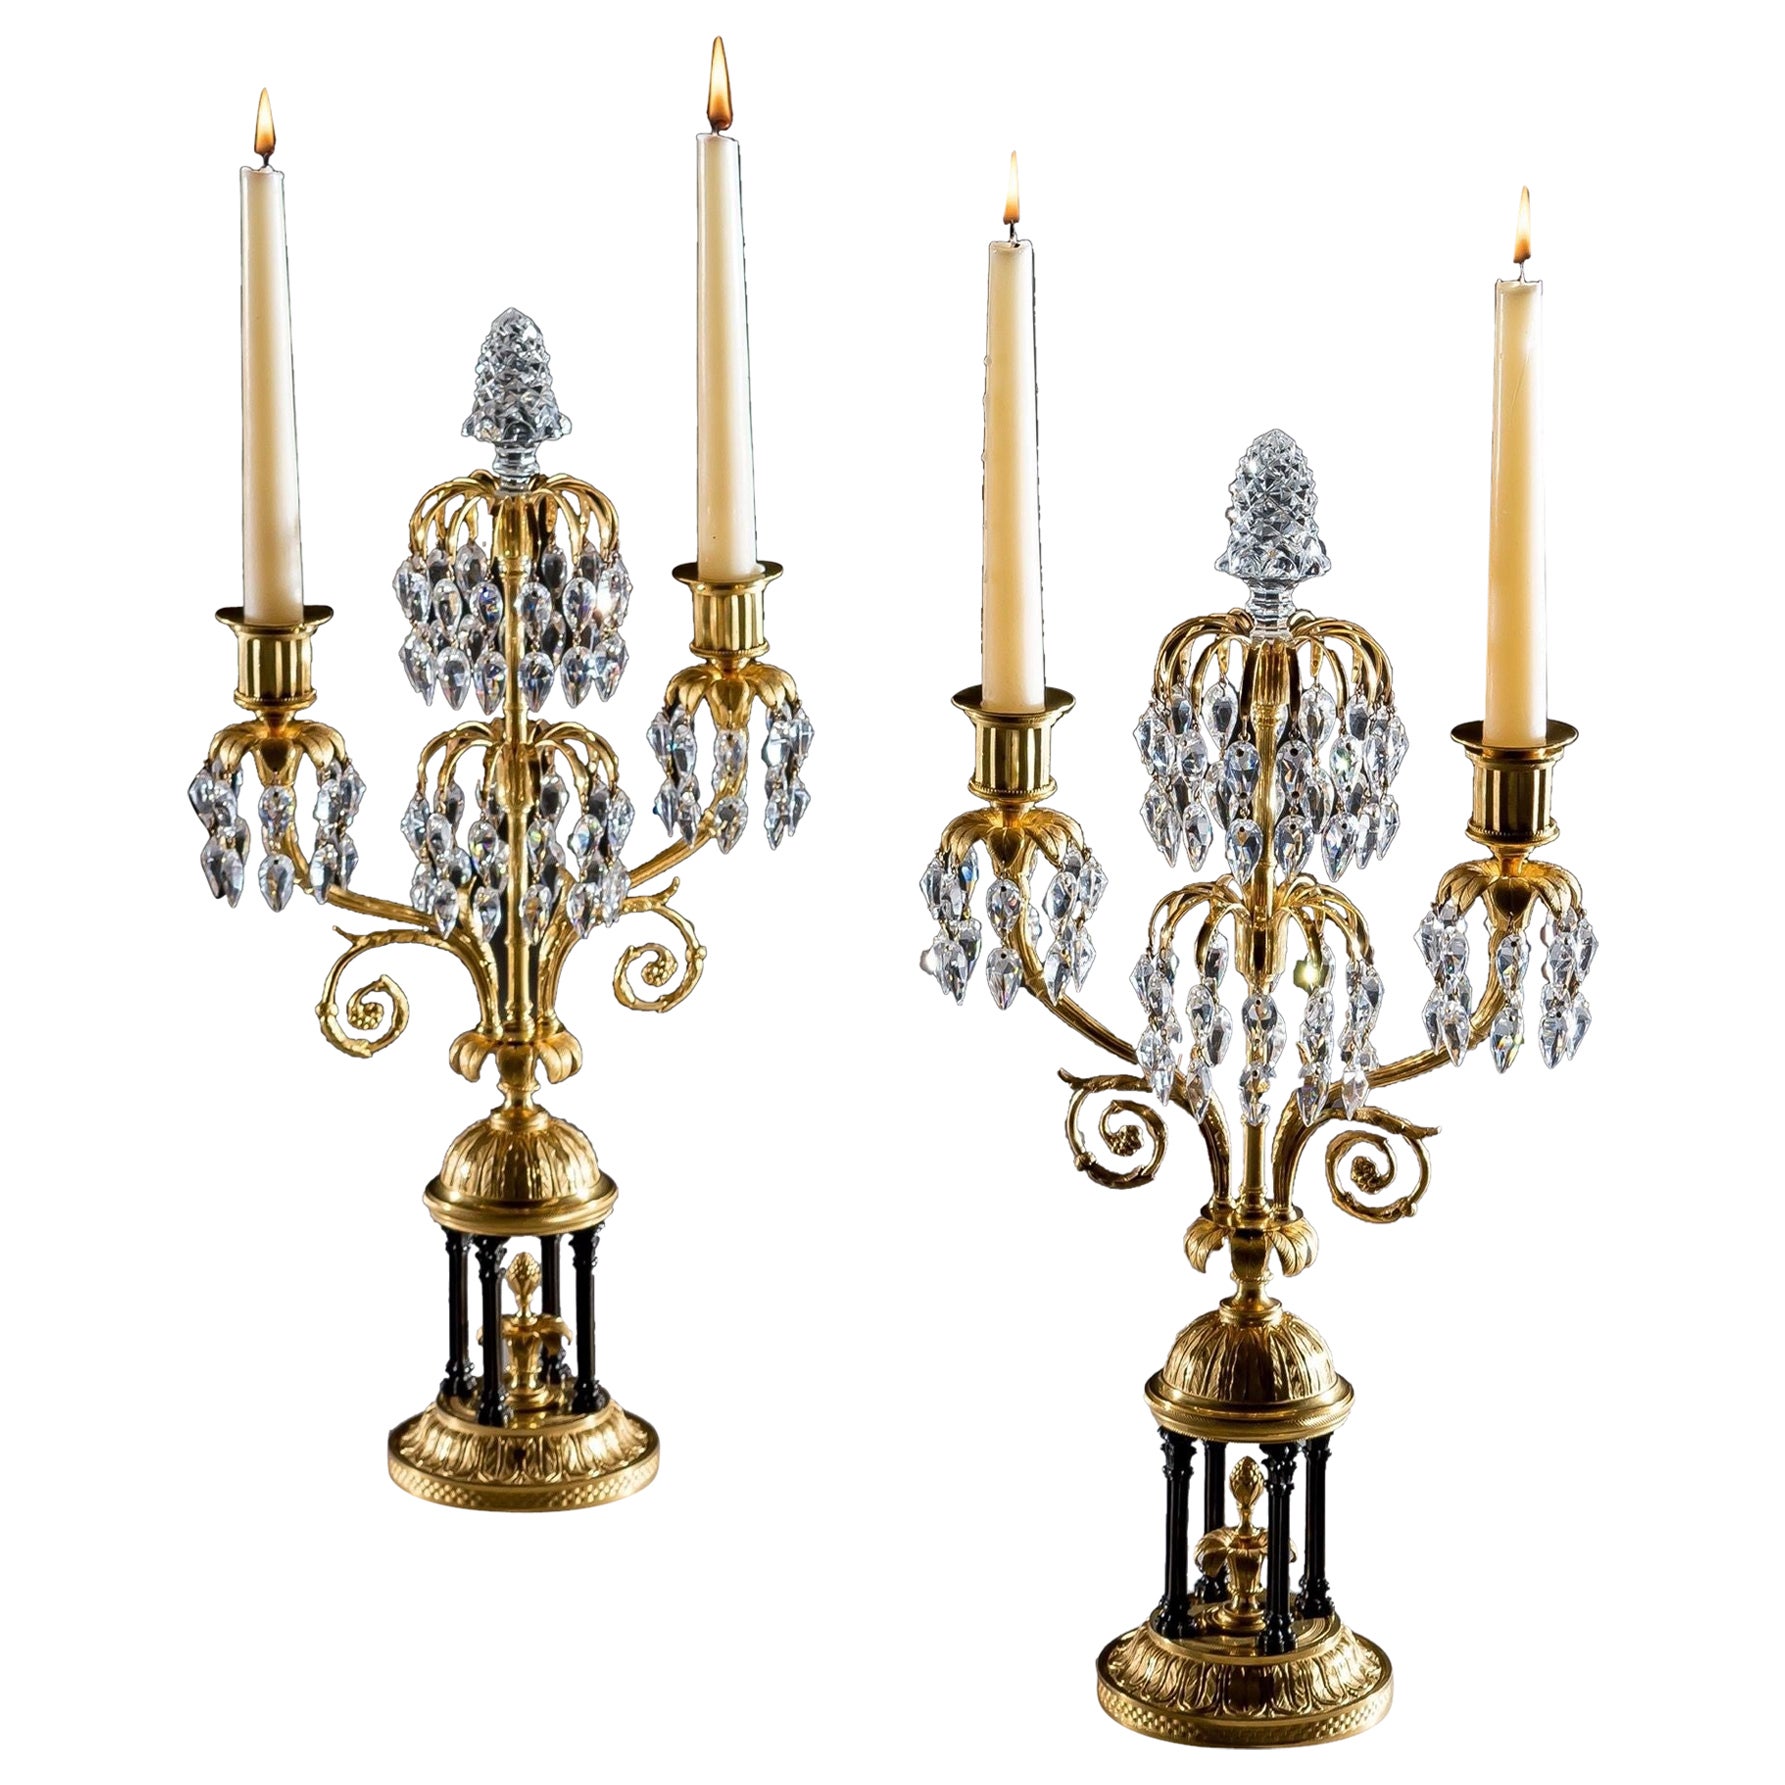 An Exceptional Pair Of Regency Temple Candelabras